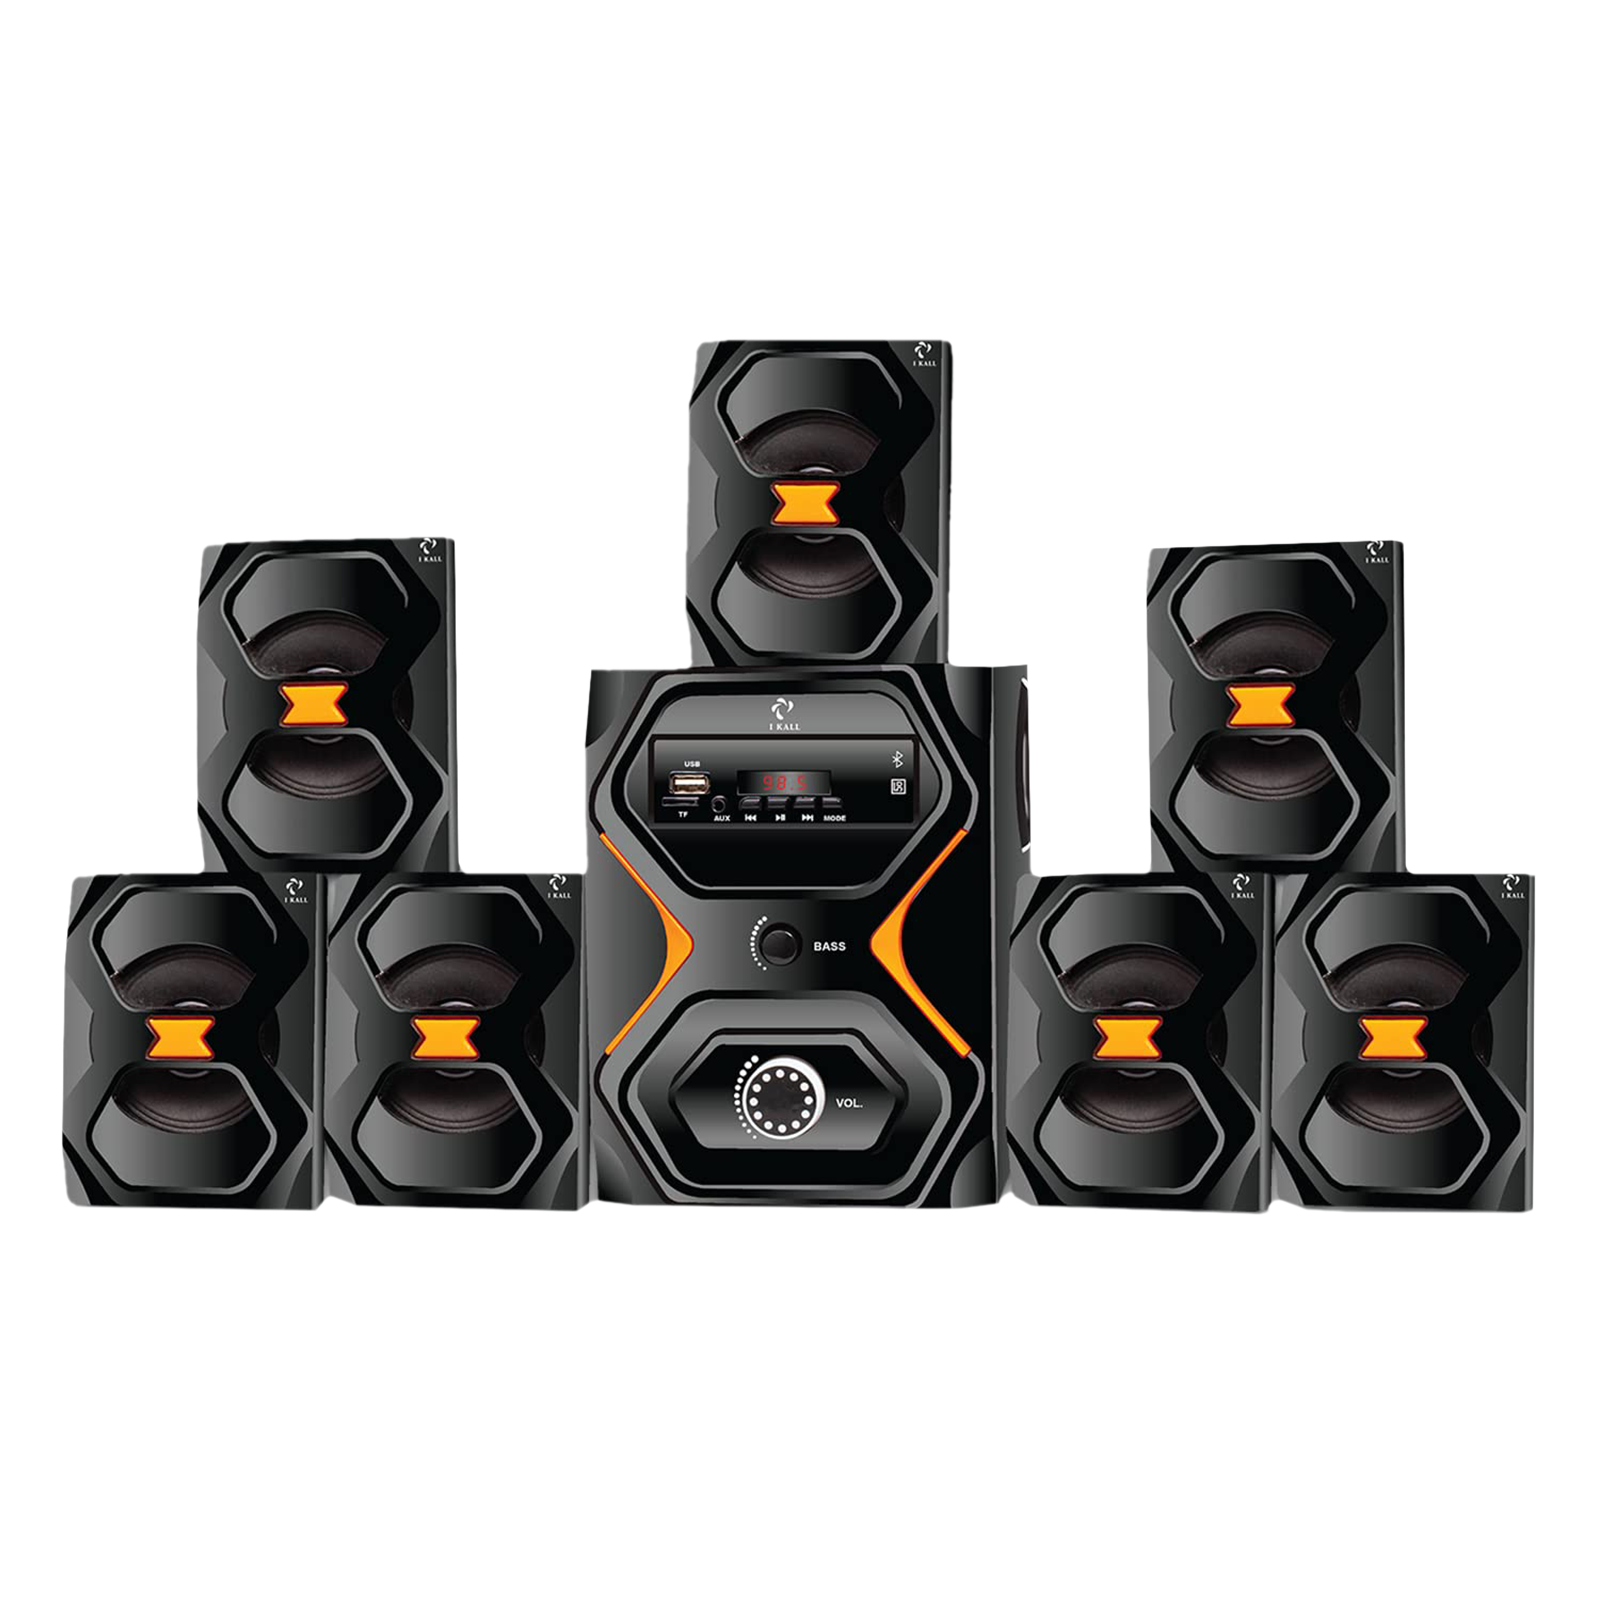 I KALL IK-2222 90 Watts Multimedia Standard Home Theatre with Remote(Room-filling Audio, 7.1 Channel, Black)